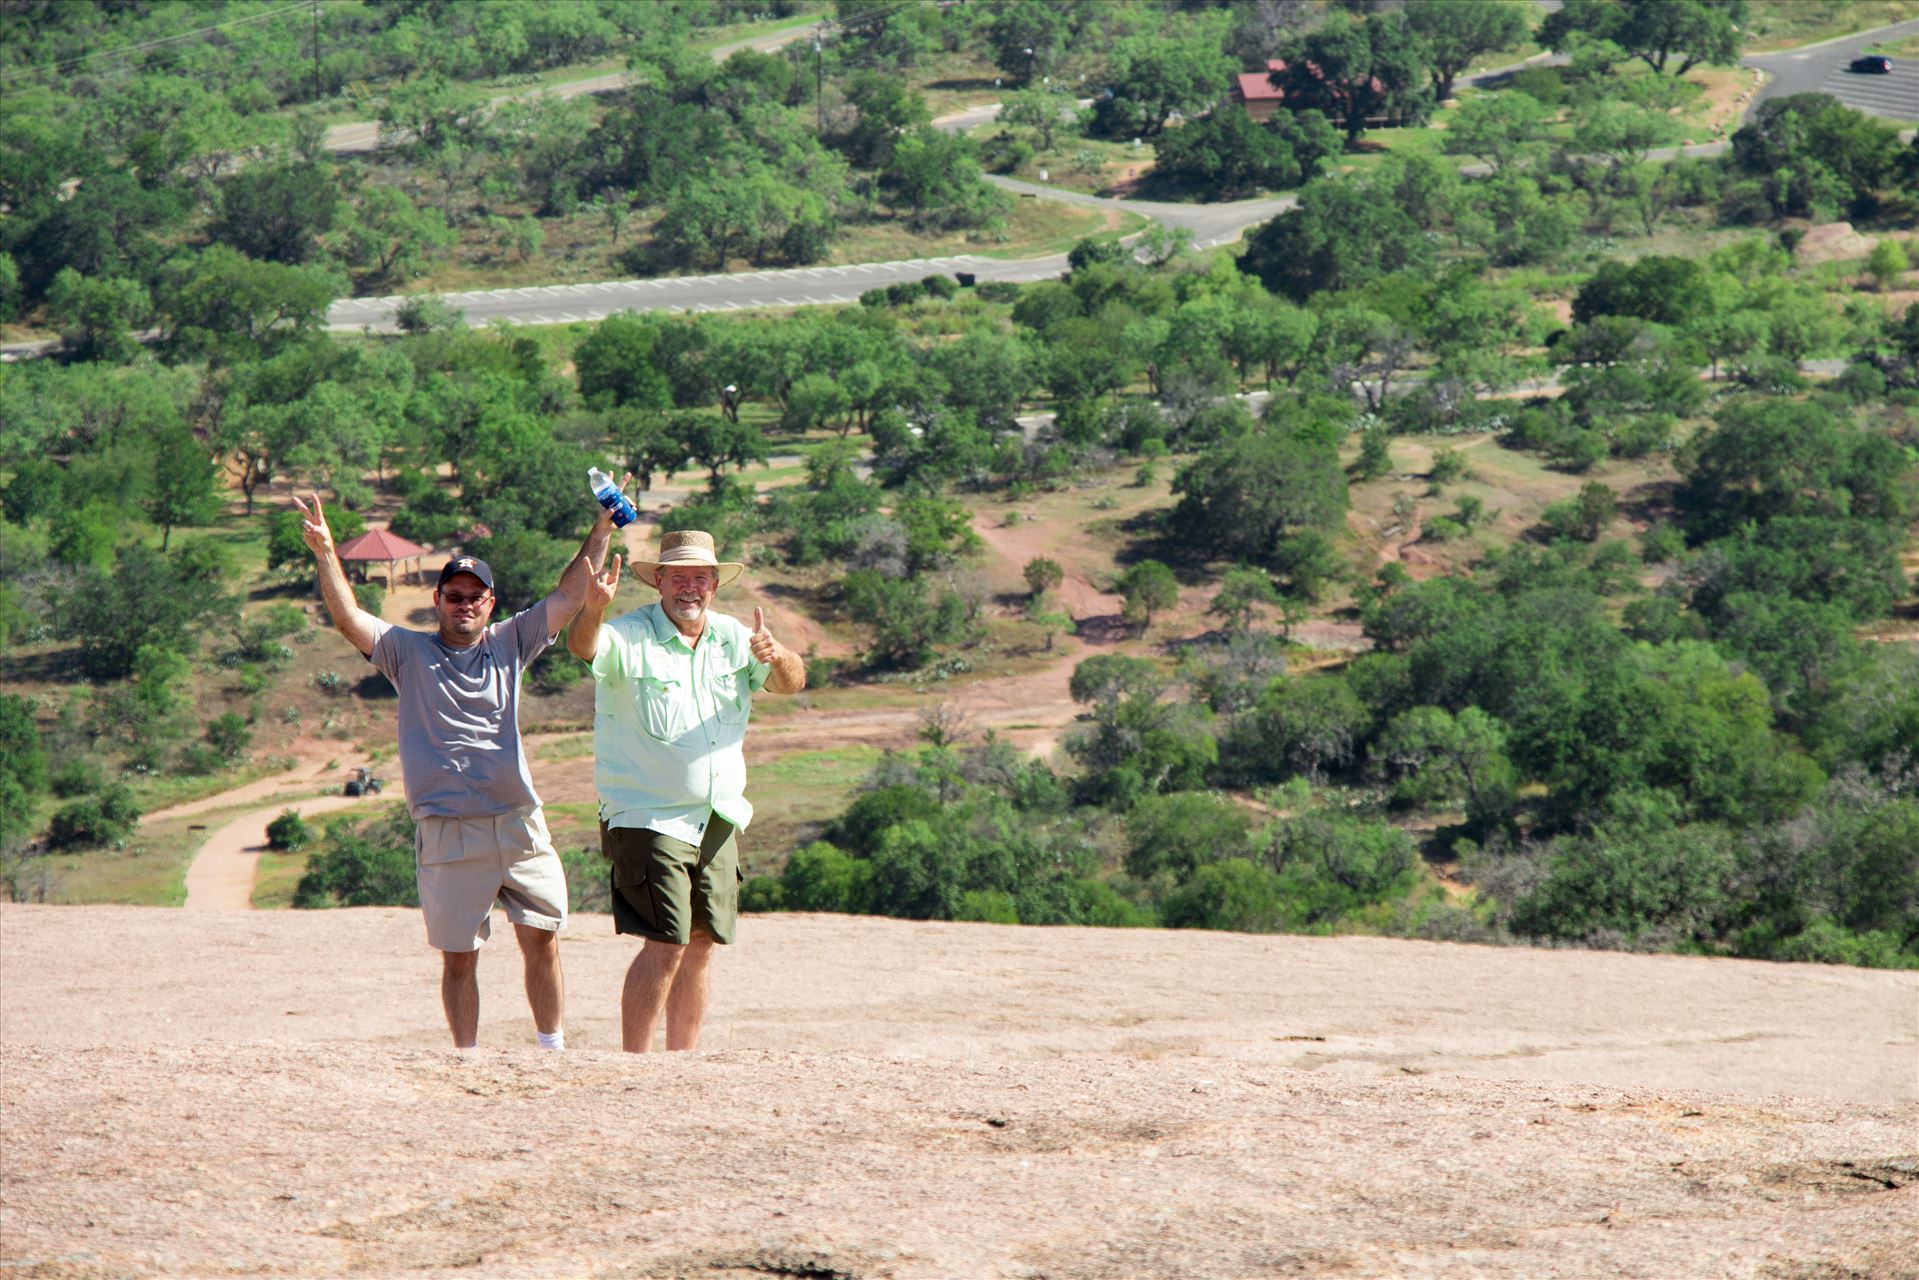 20130723-Enchanted Rock-DSLR-037.jpg  by Charles Smith Photography